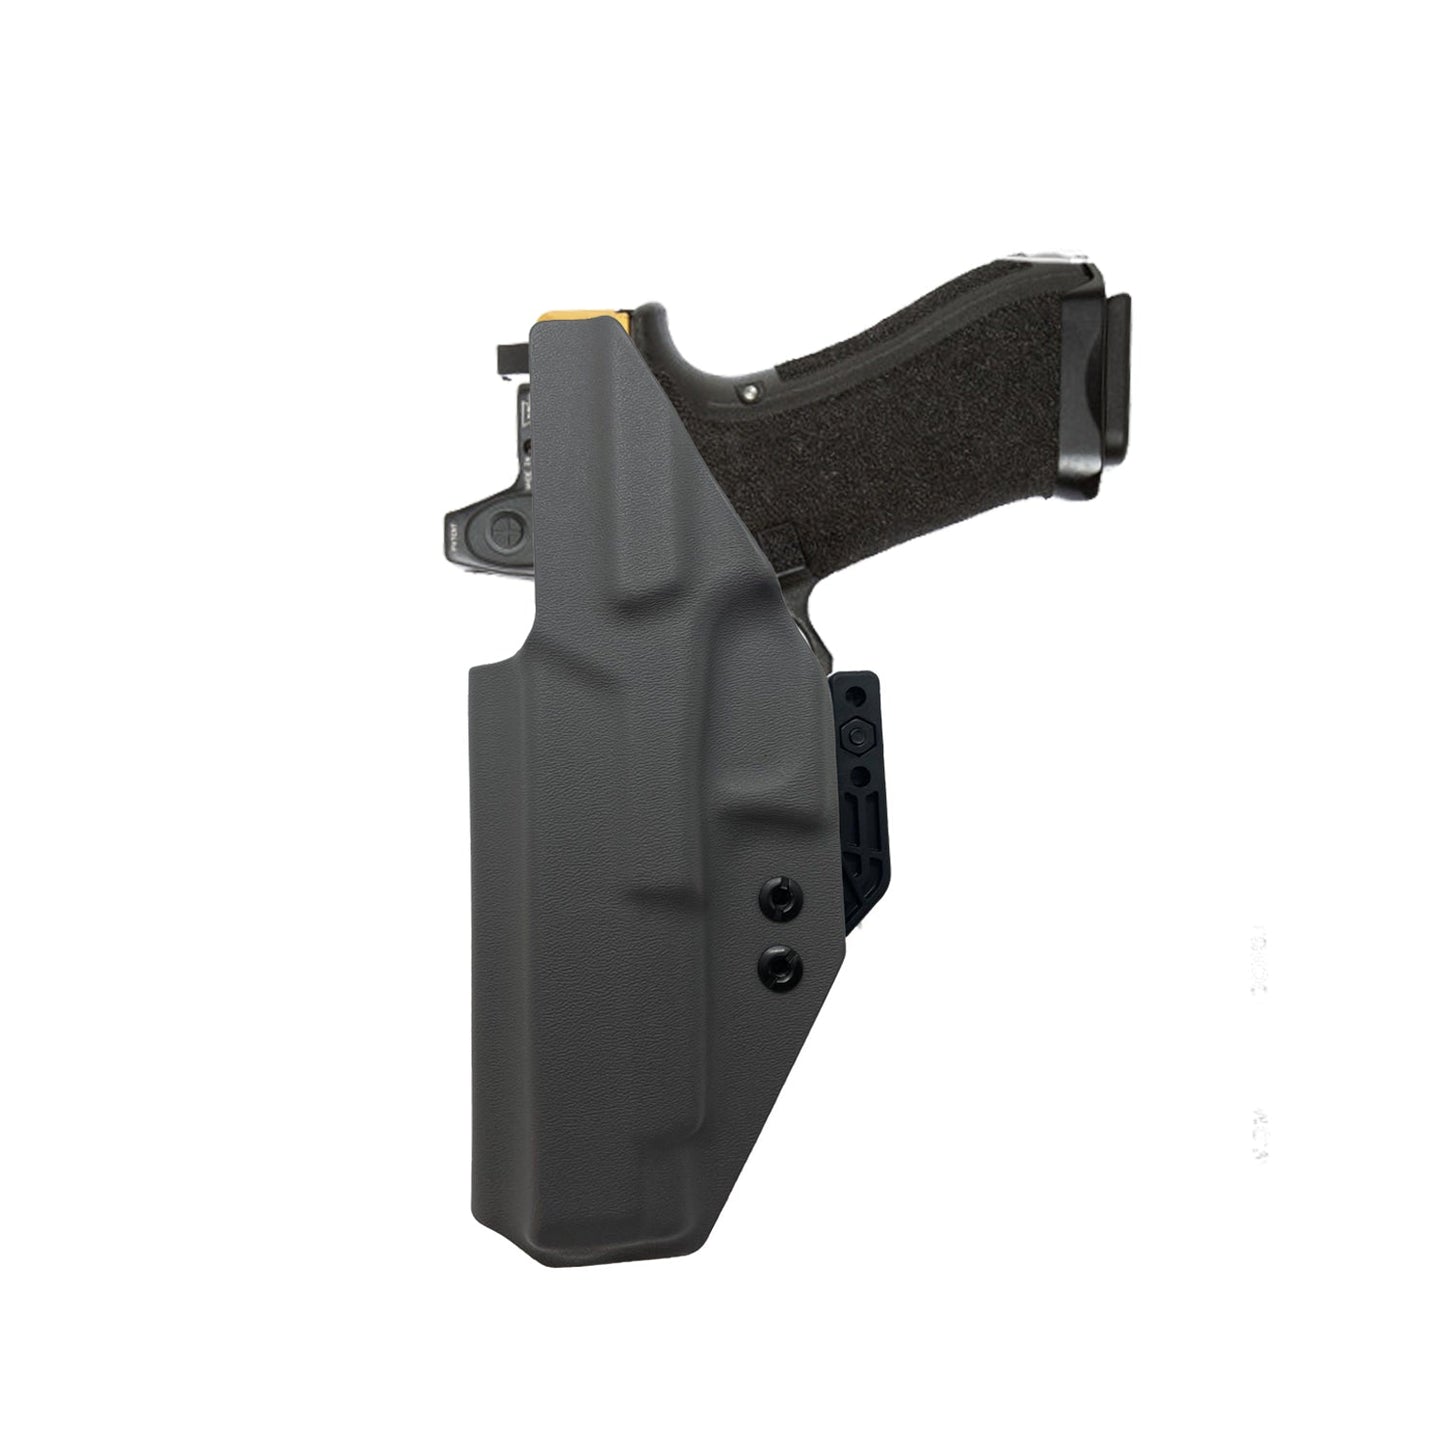 GLOCK 21 WIth TLR1 Light (ULTI-CLIP 3) IWB (Inside The Waistband Holster)